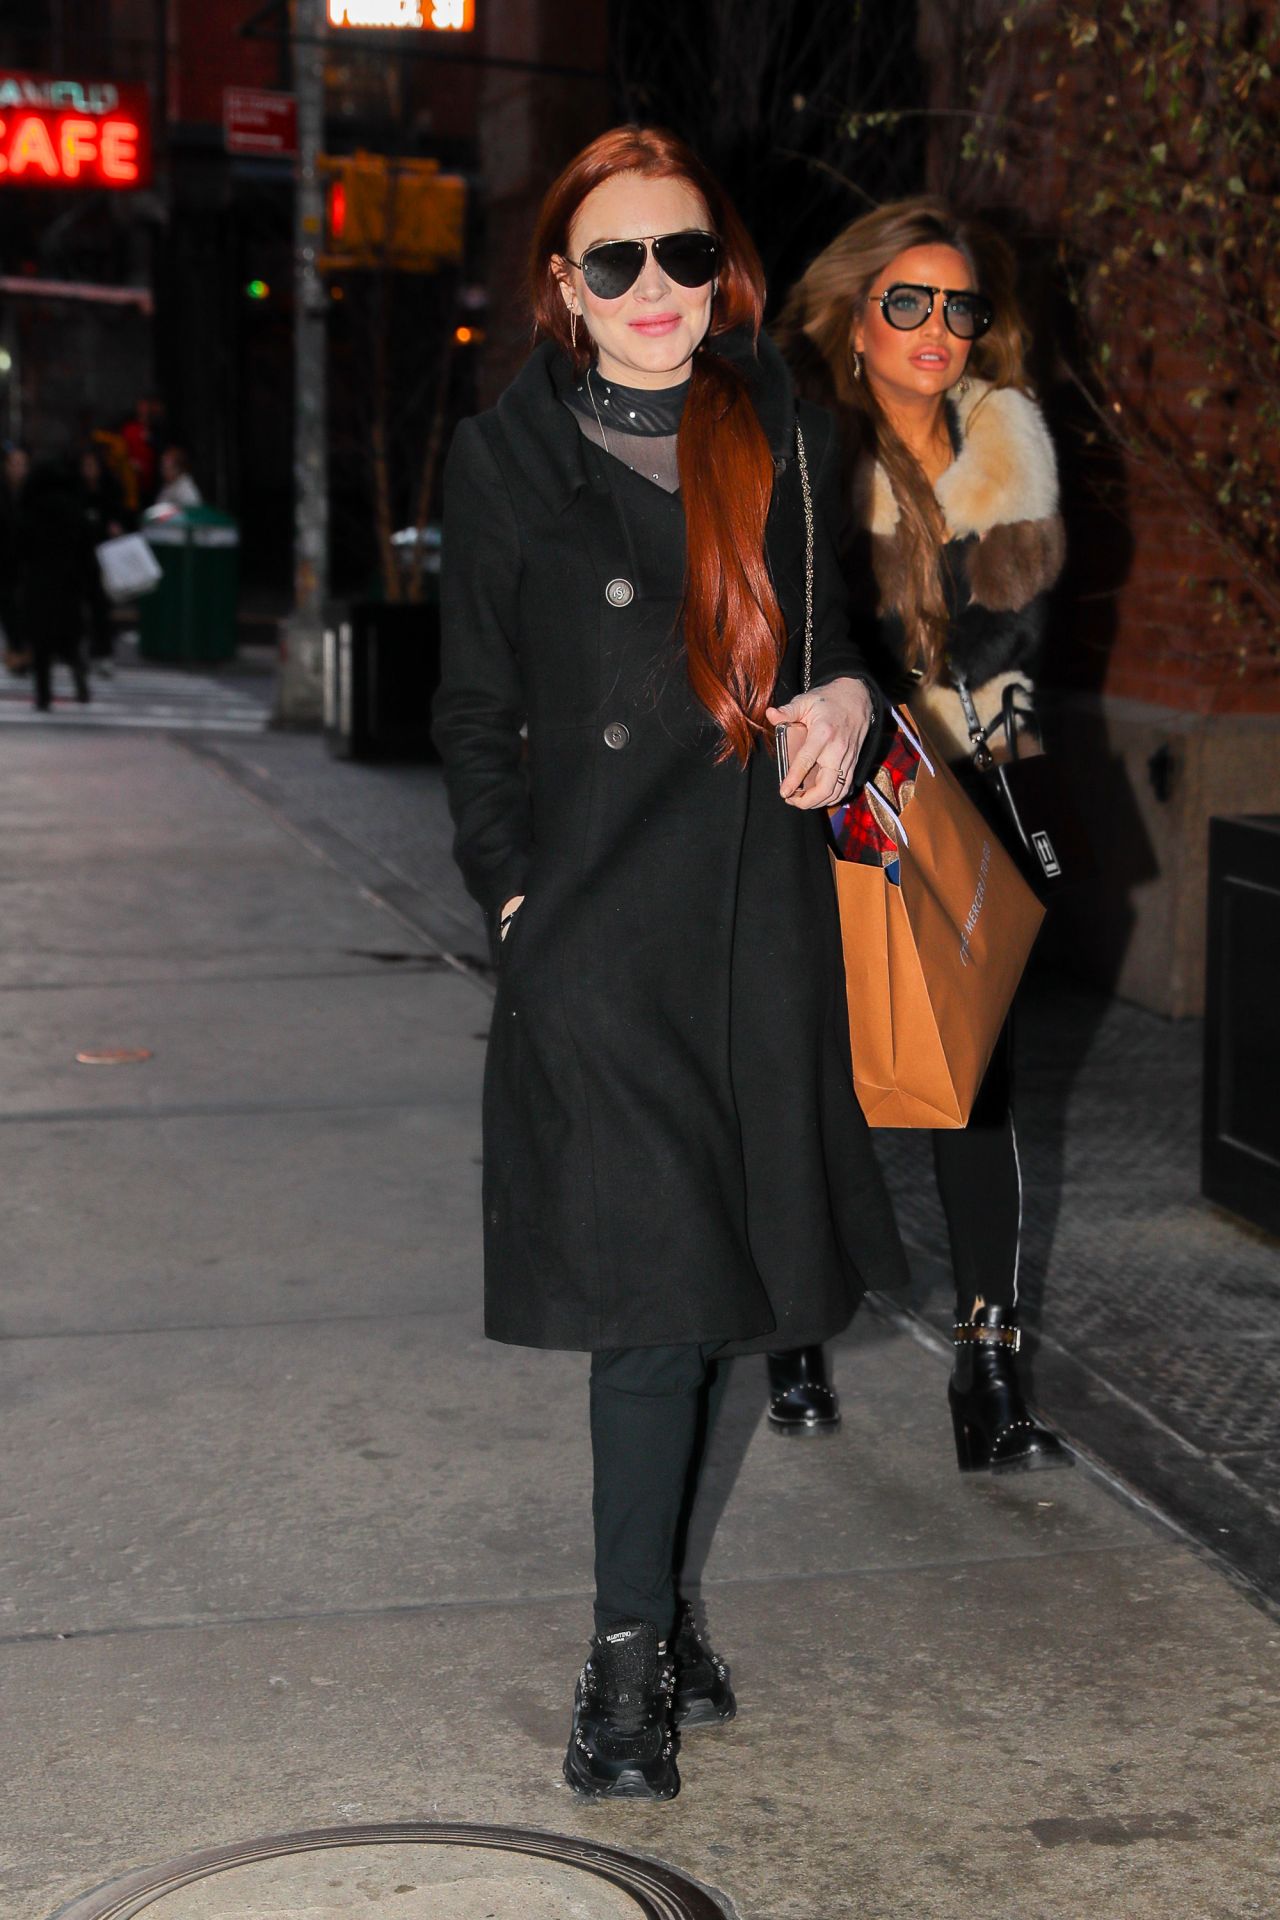 lindsay-lohan-night-out-in-new-york-01-02-2019-3.jpg